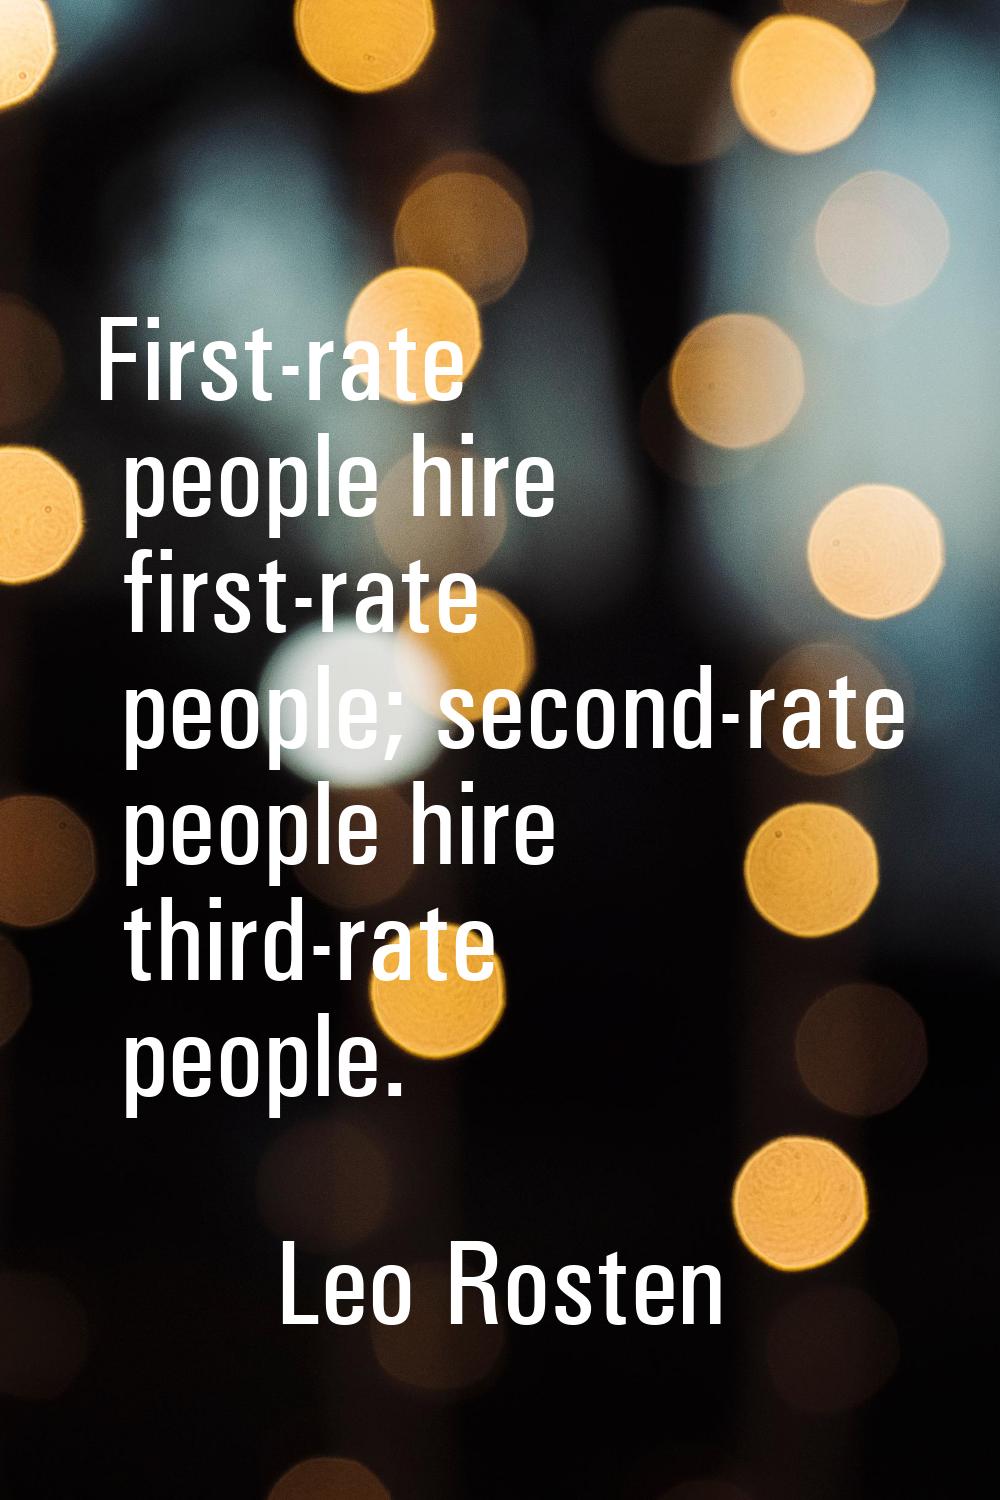 First-rate people hire first-rate people; second-rate people hire third-rate people.